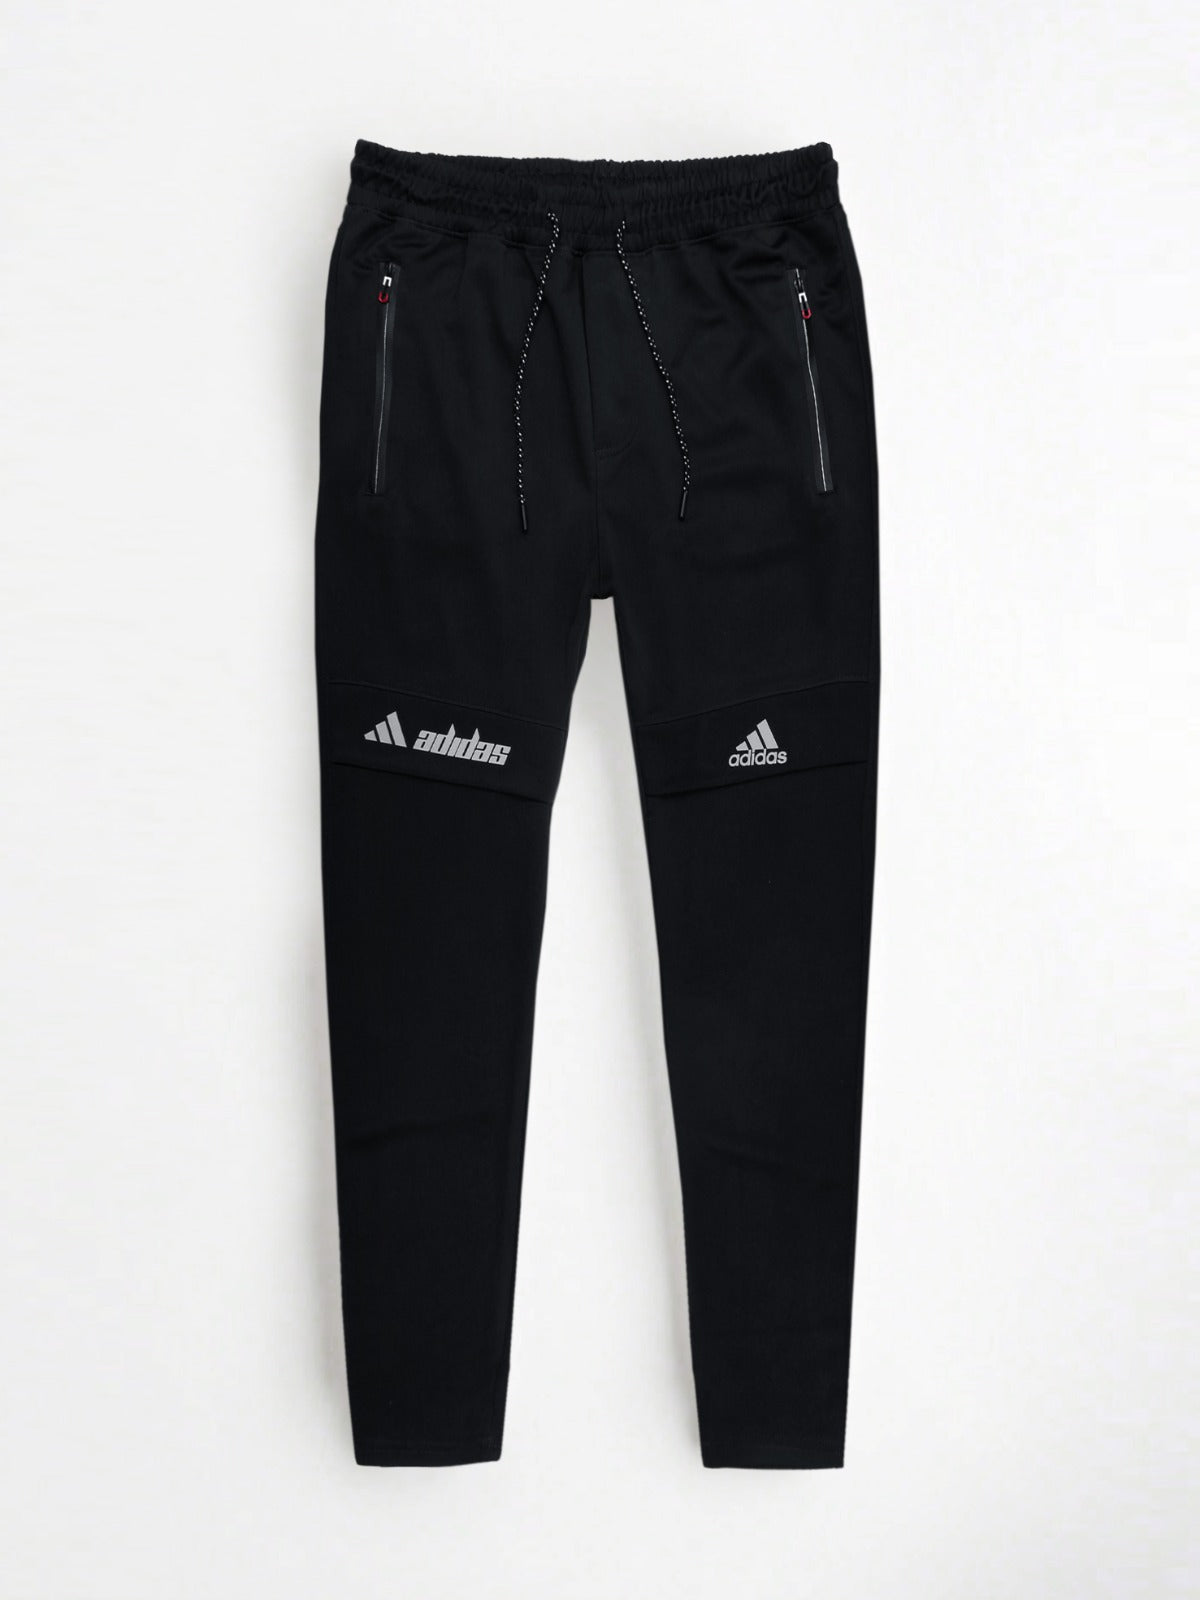 ADDS black ankle fit trouser (00308)